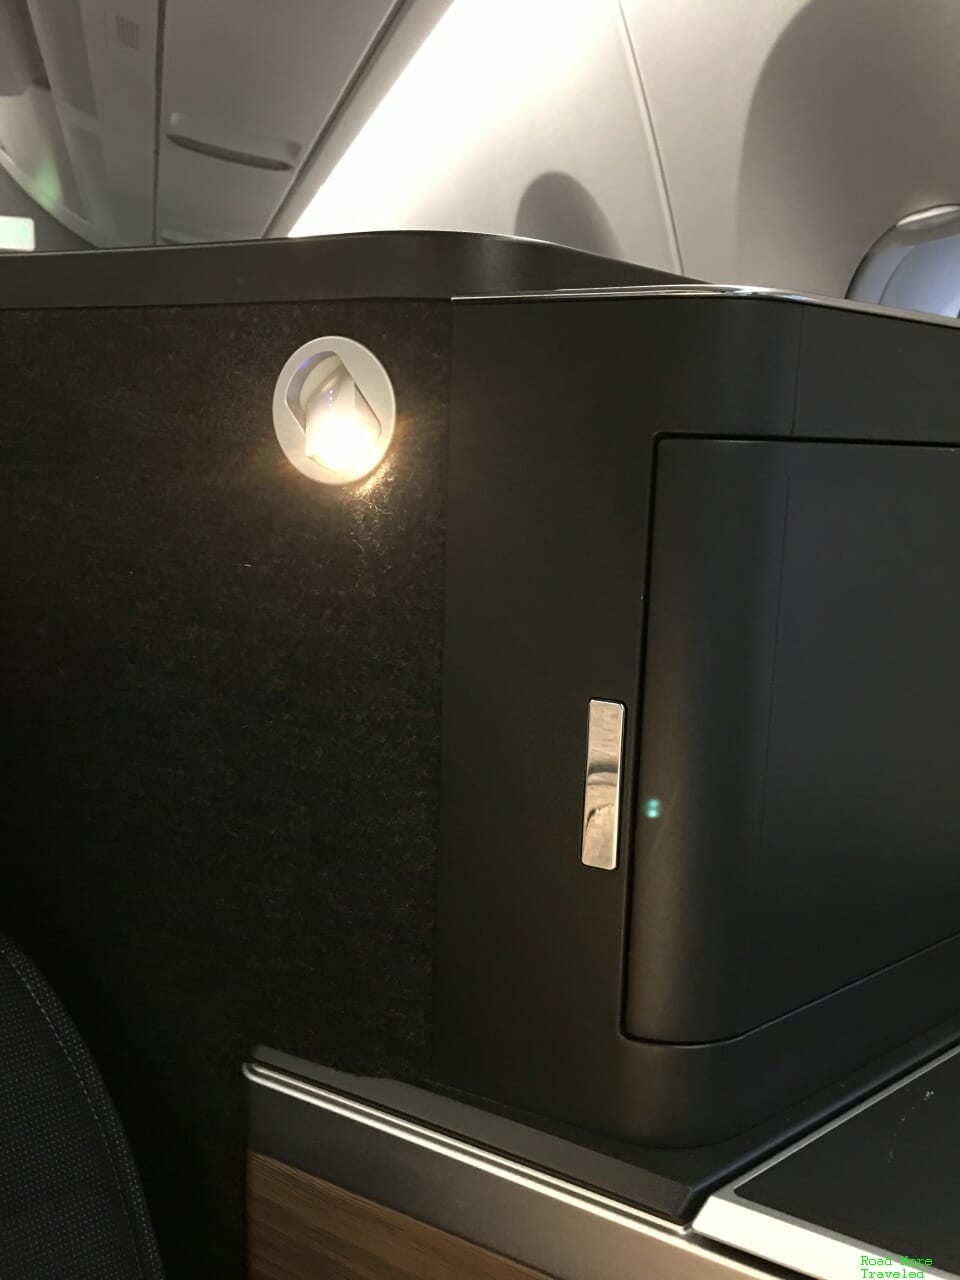 BA A350 Club Suite light and storage compartment